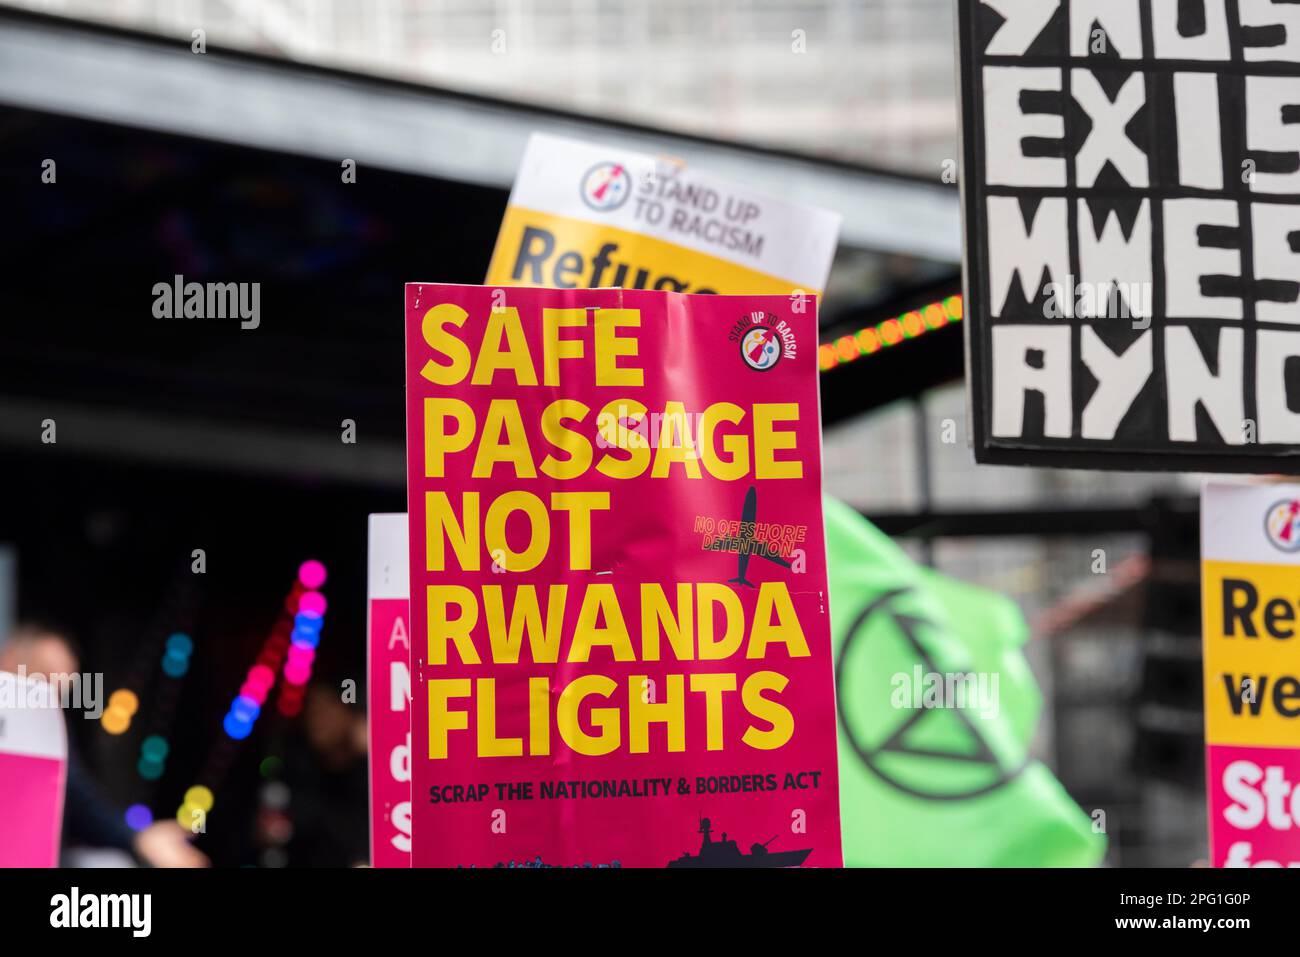 Protest taking place in London on UN Anti Racism Day. Stand up to Racism. Safe passage not Rwanda flights placard. Nationality and borders act Stock Photo